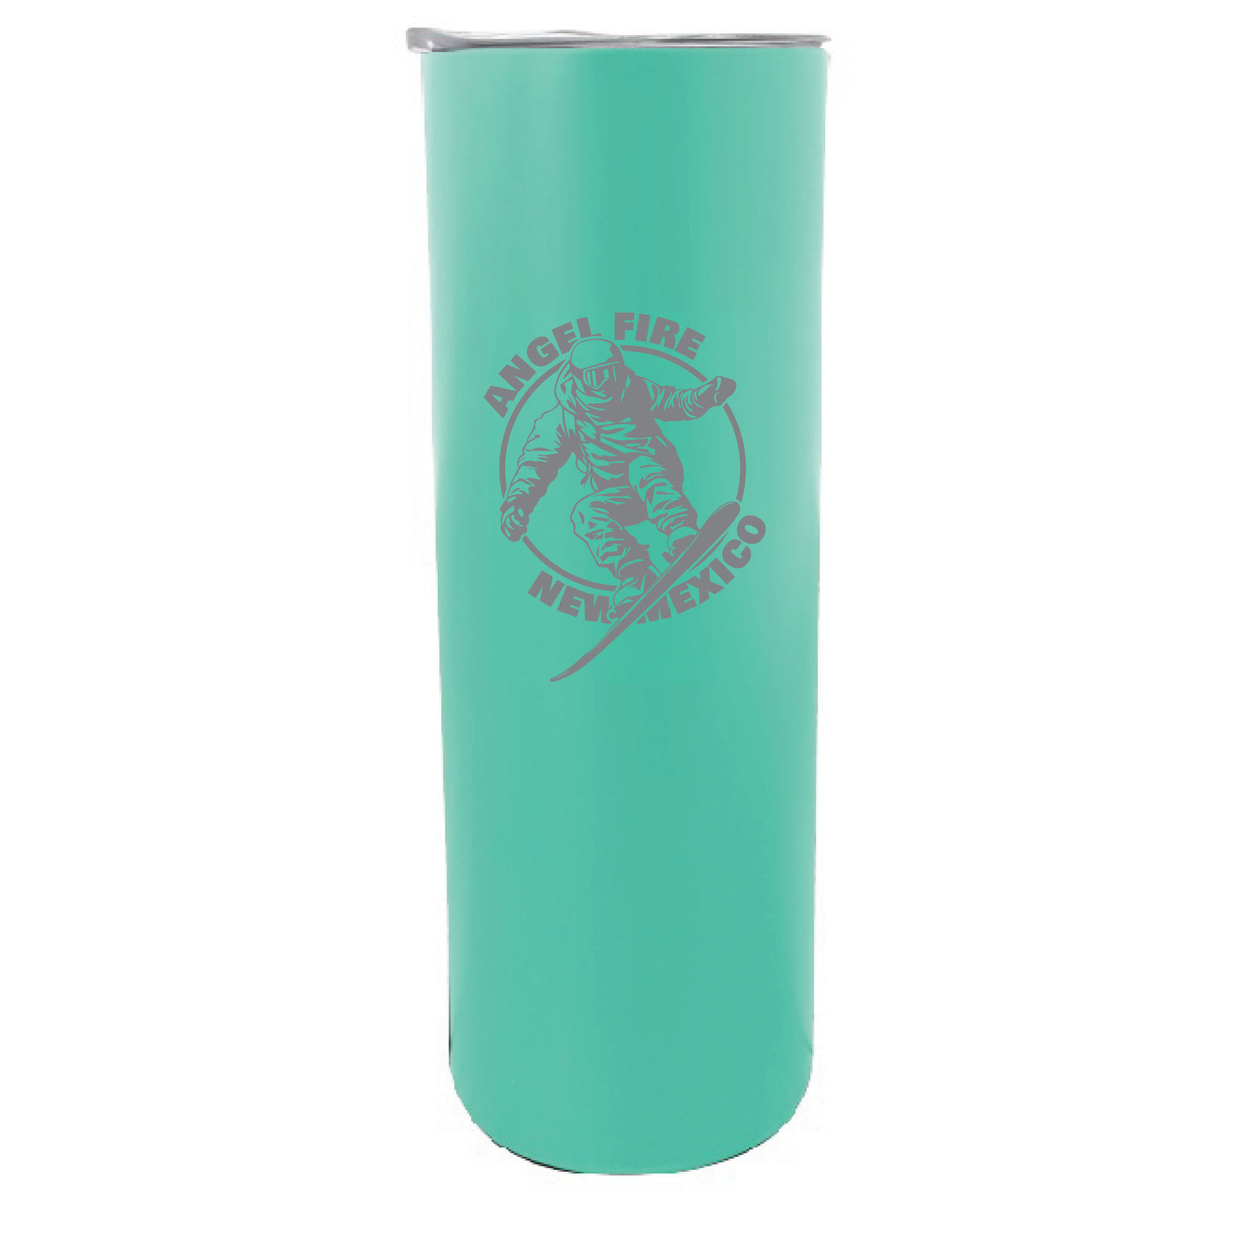 Angel Fire New Mexico Souvenir 20 Oz Engraved Insulated Stainless Steel Skinny Tumbler - Black Glitter,,Single Unit